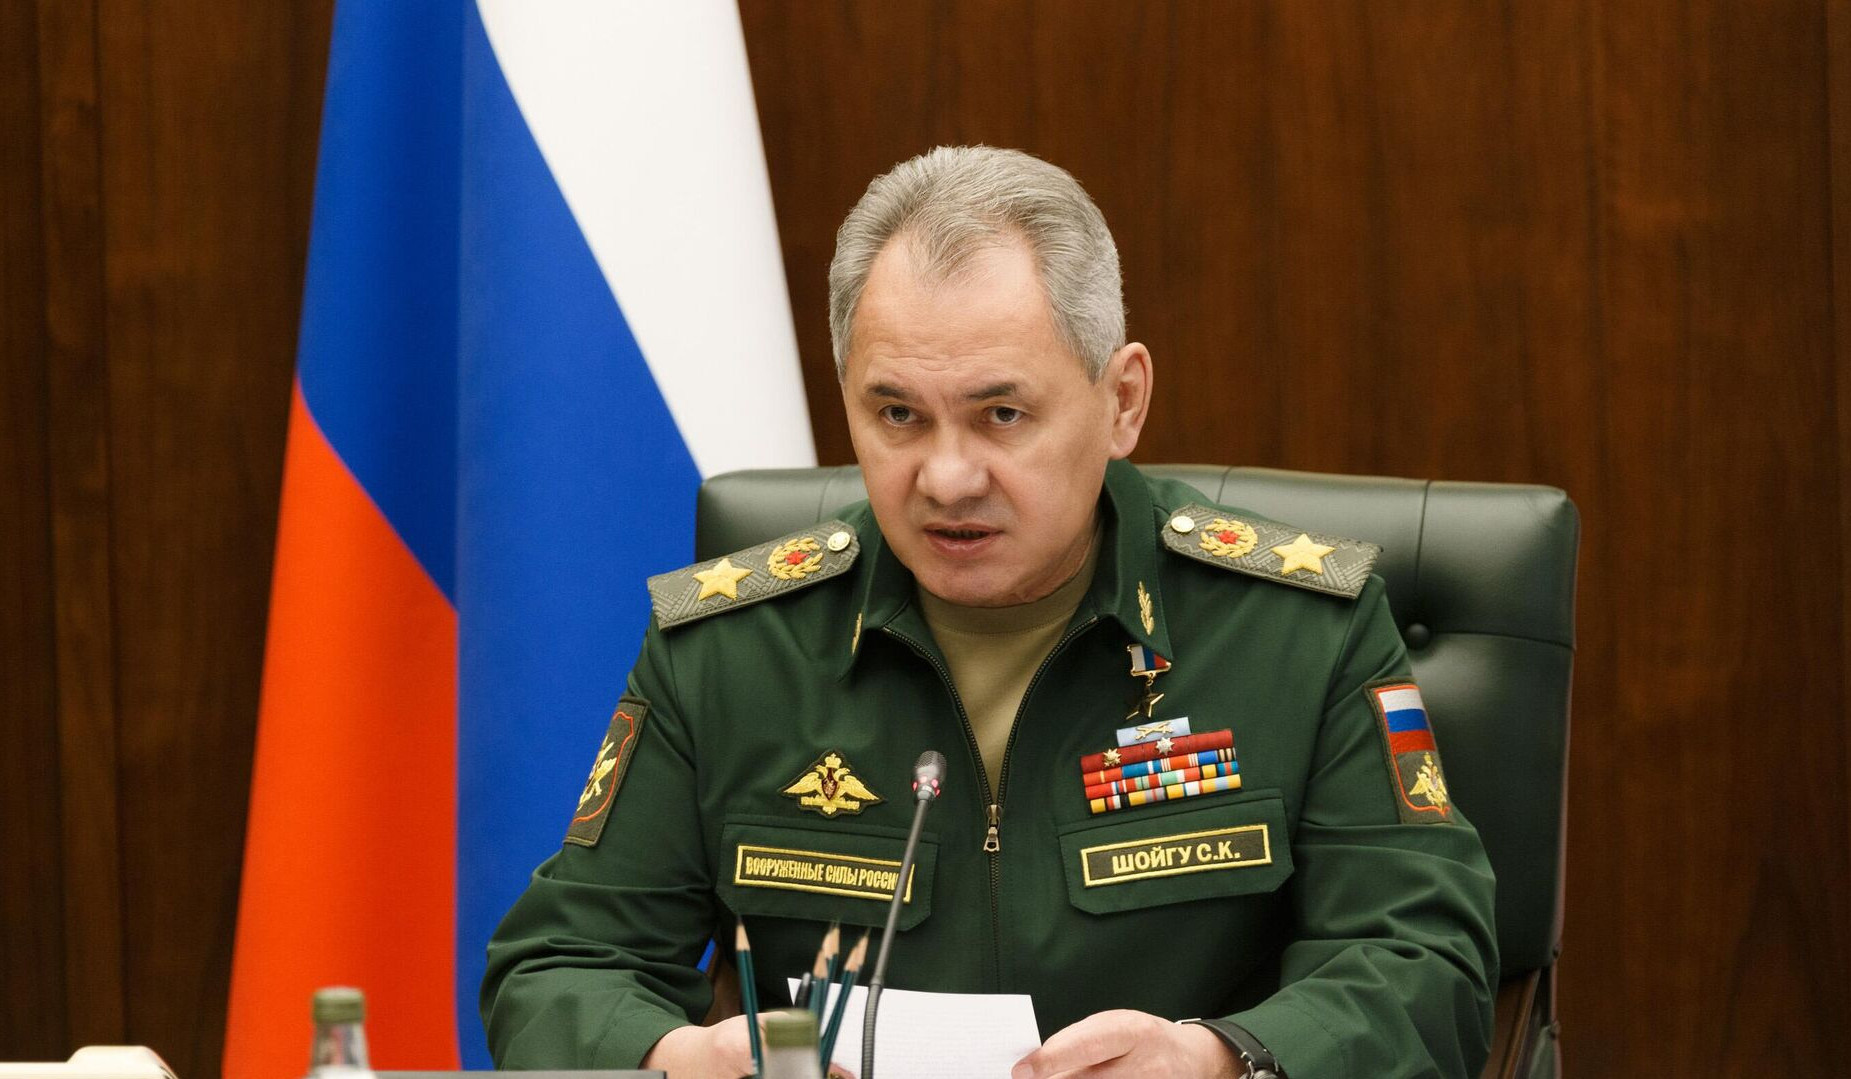 Russia has never threatened NATO, it was NATO that approached Russia's borders: Shoigu